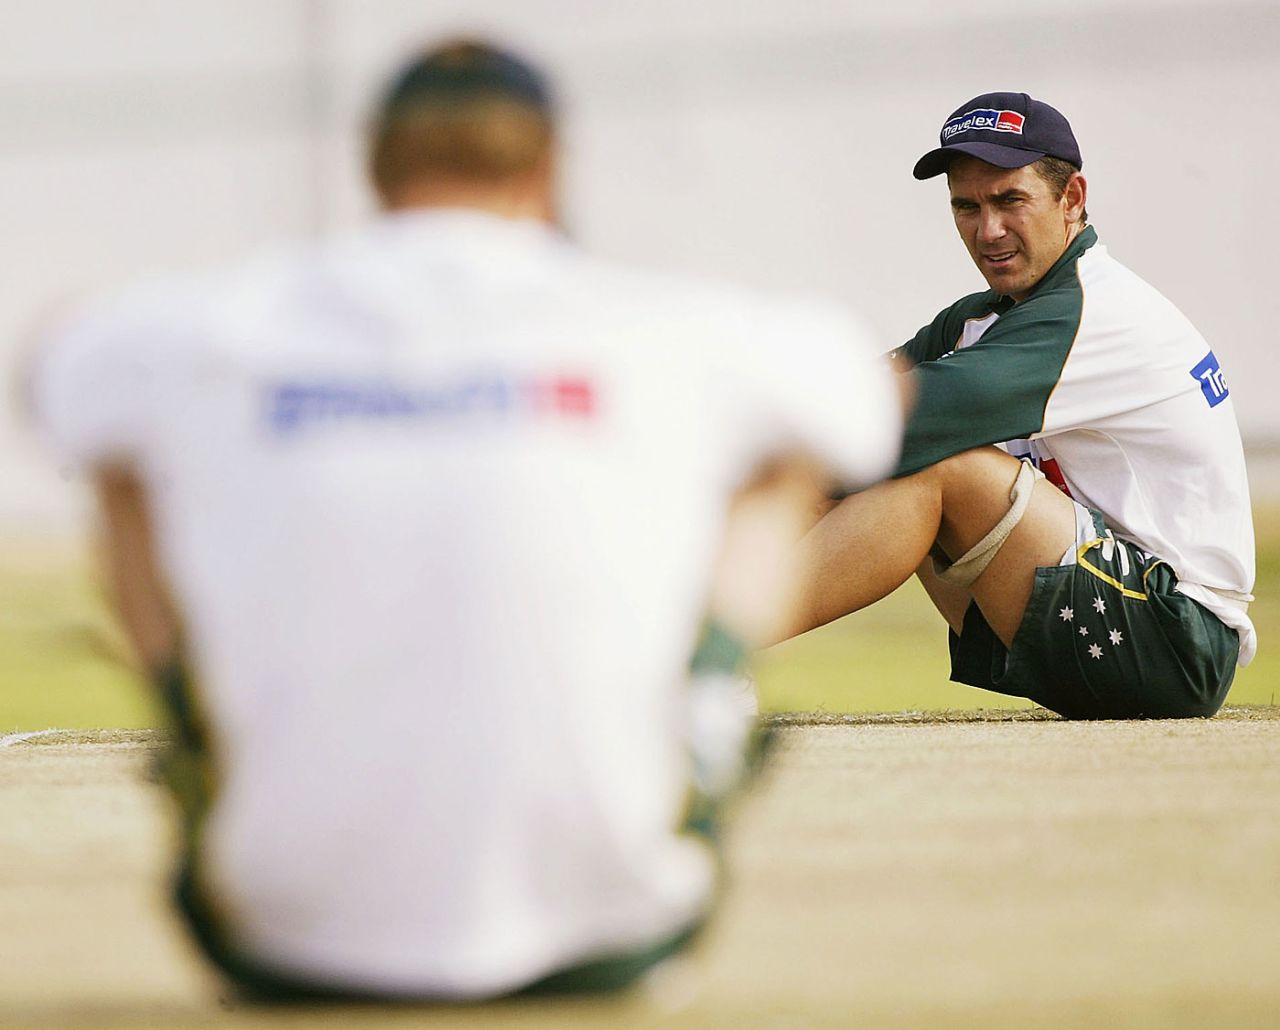 Matthew Hayden concentrates on the pitch as Justin Langer looks on, Colombo, March 23, 2004